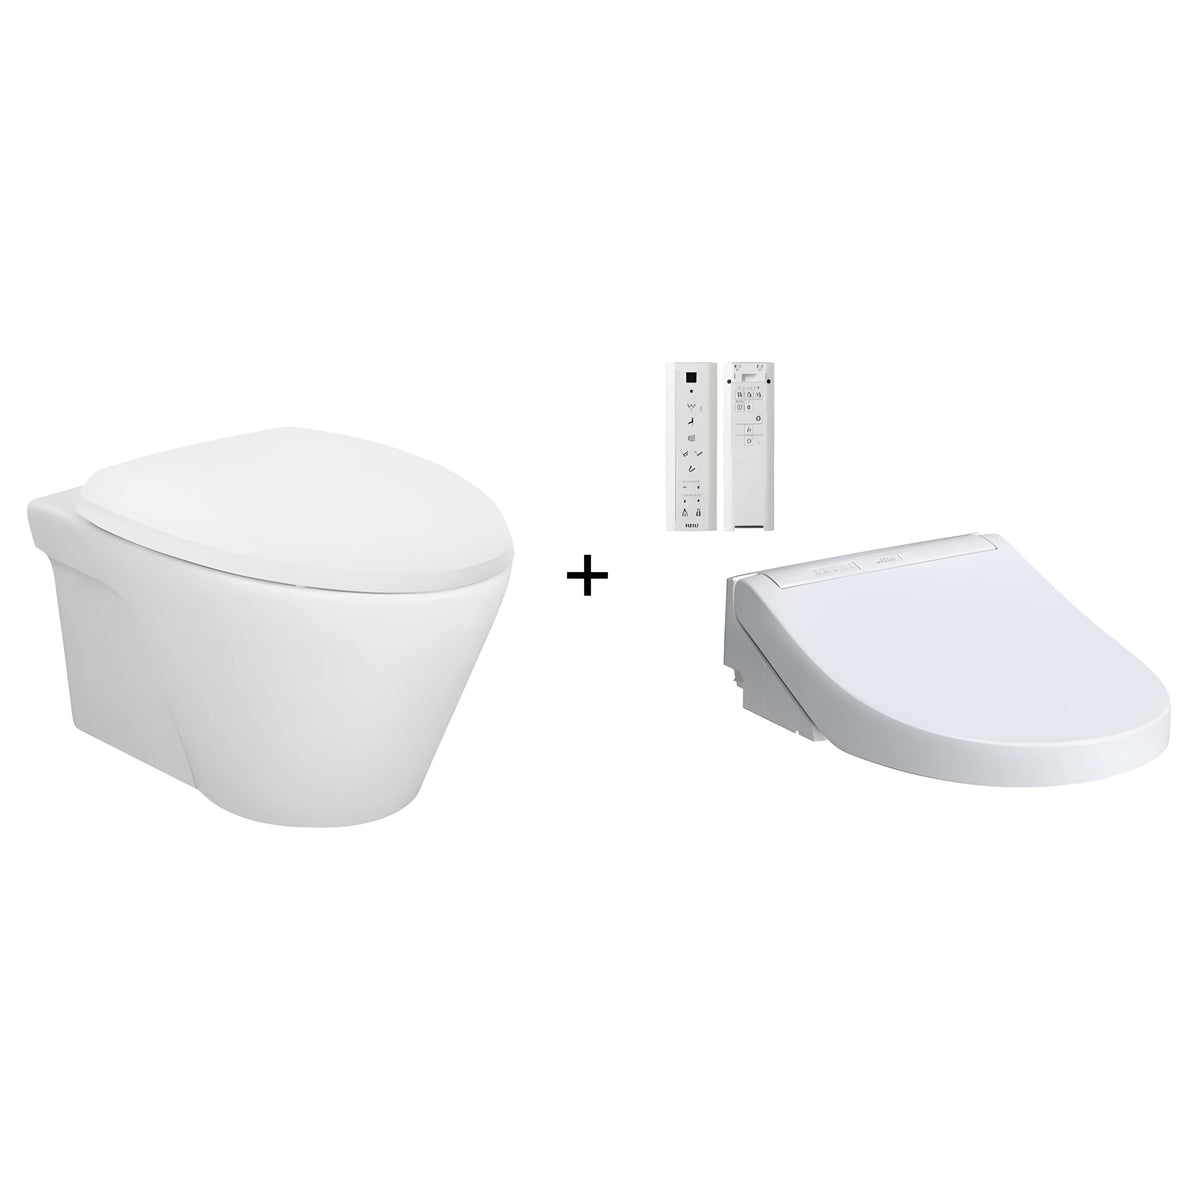 TOTO AVANTE WALL HUNG TOILET AND C5 WASHLET W/ REMOTE CONTROL (ROUND) GLOSS WHITE